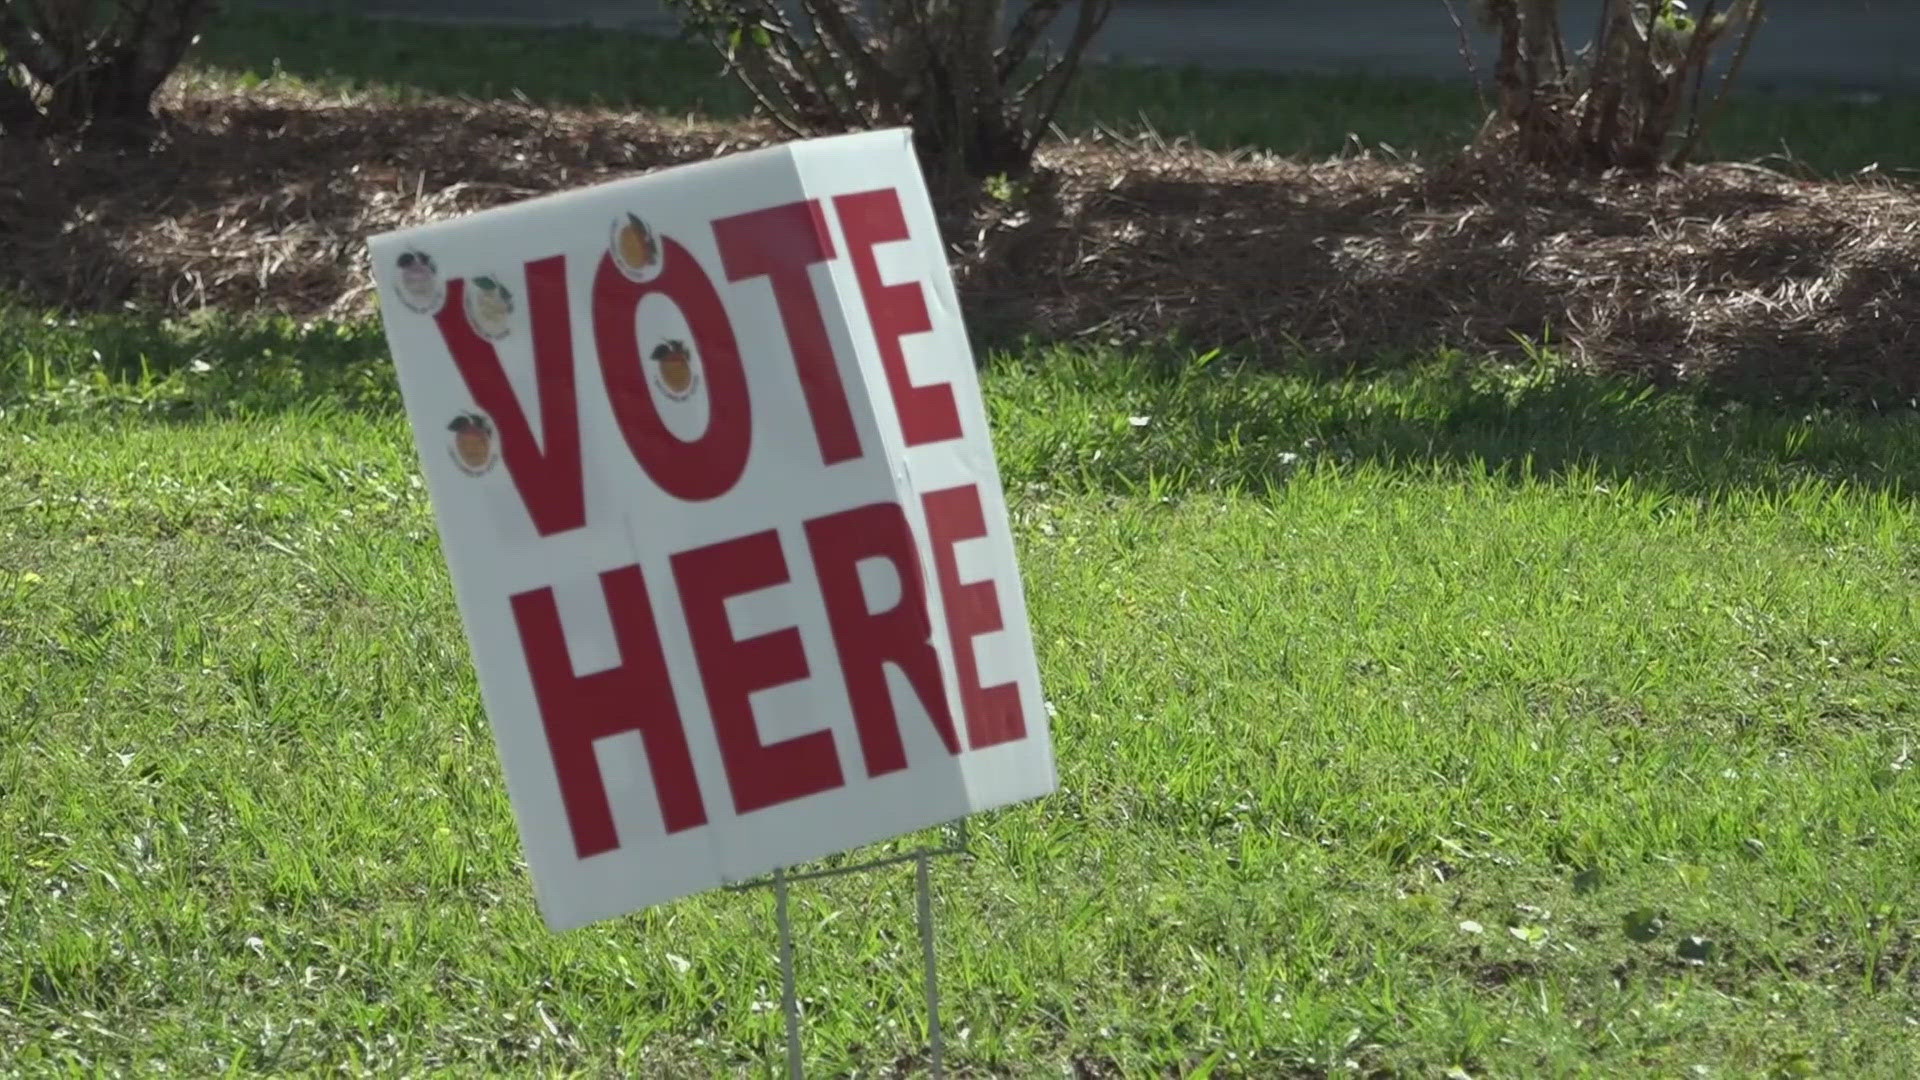 Glynn and Camden counties had a higher percentage of early voters compared to other counties in the state.